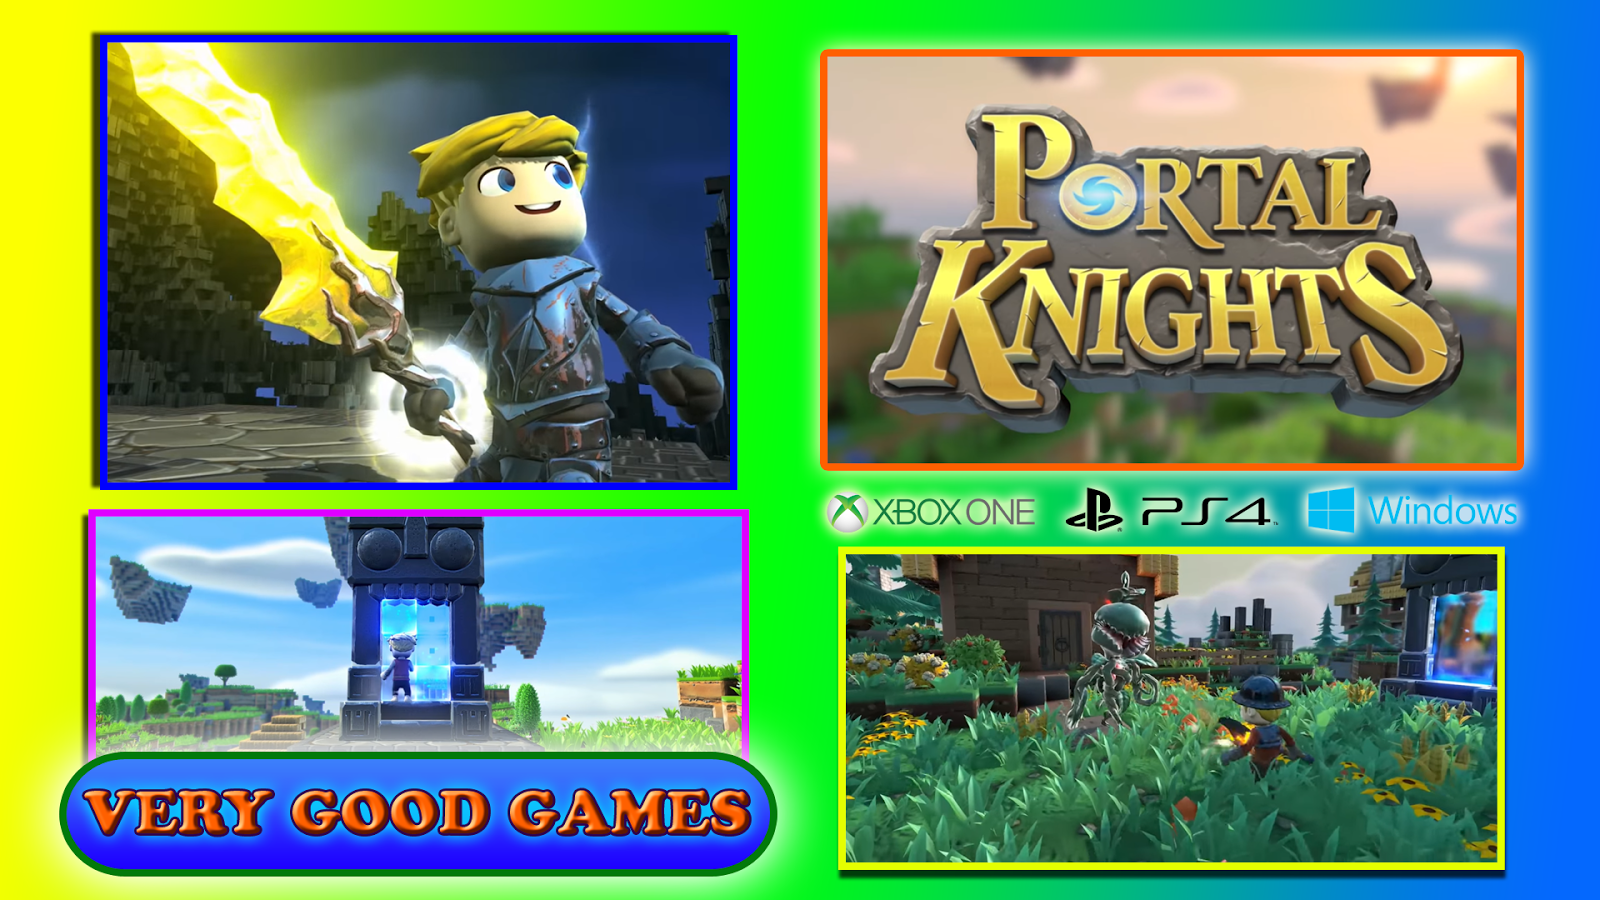 Screenshots of Portal Knights - a game for PS4 and Xbox One game consoles, for Windows computers